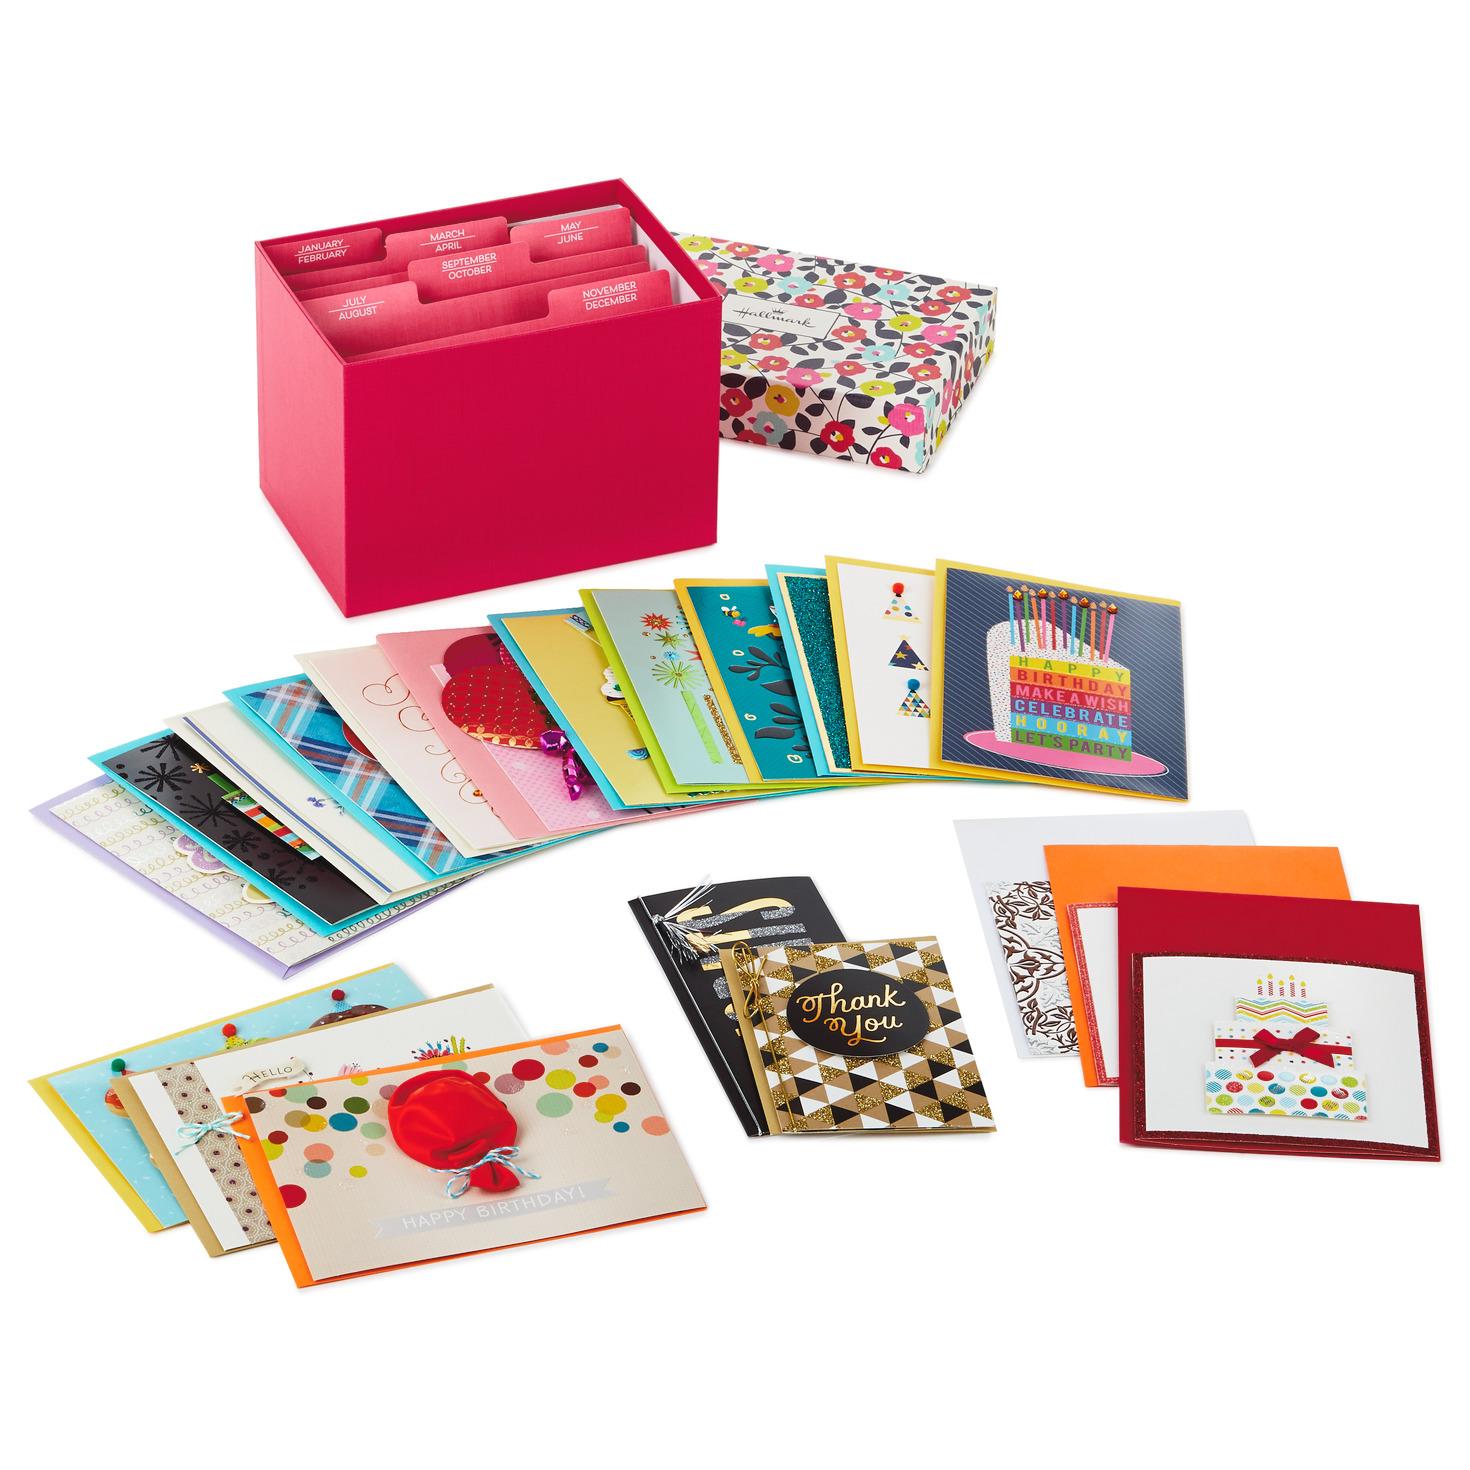 All Occasion Card Assortment in Decorative Box, Set of 20 - Boxed Cards